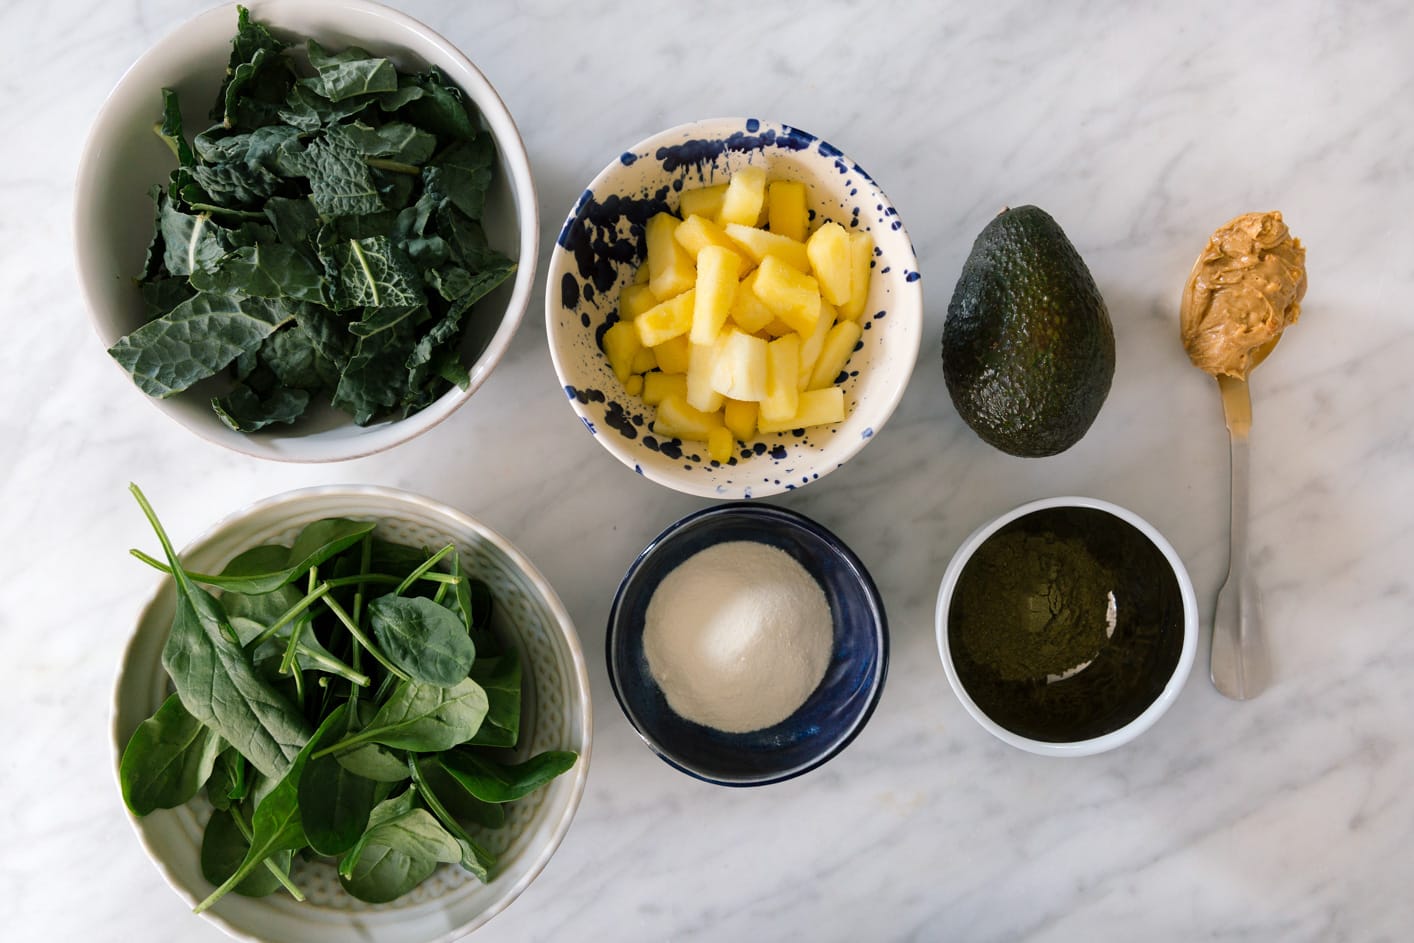 Louise Roe green smoothie recipe